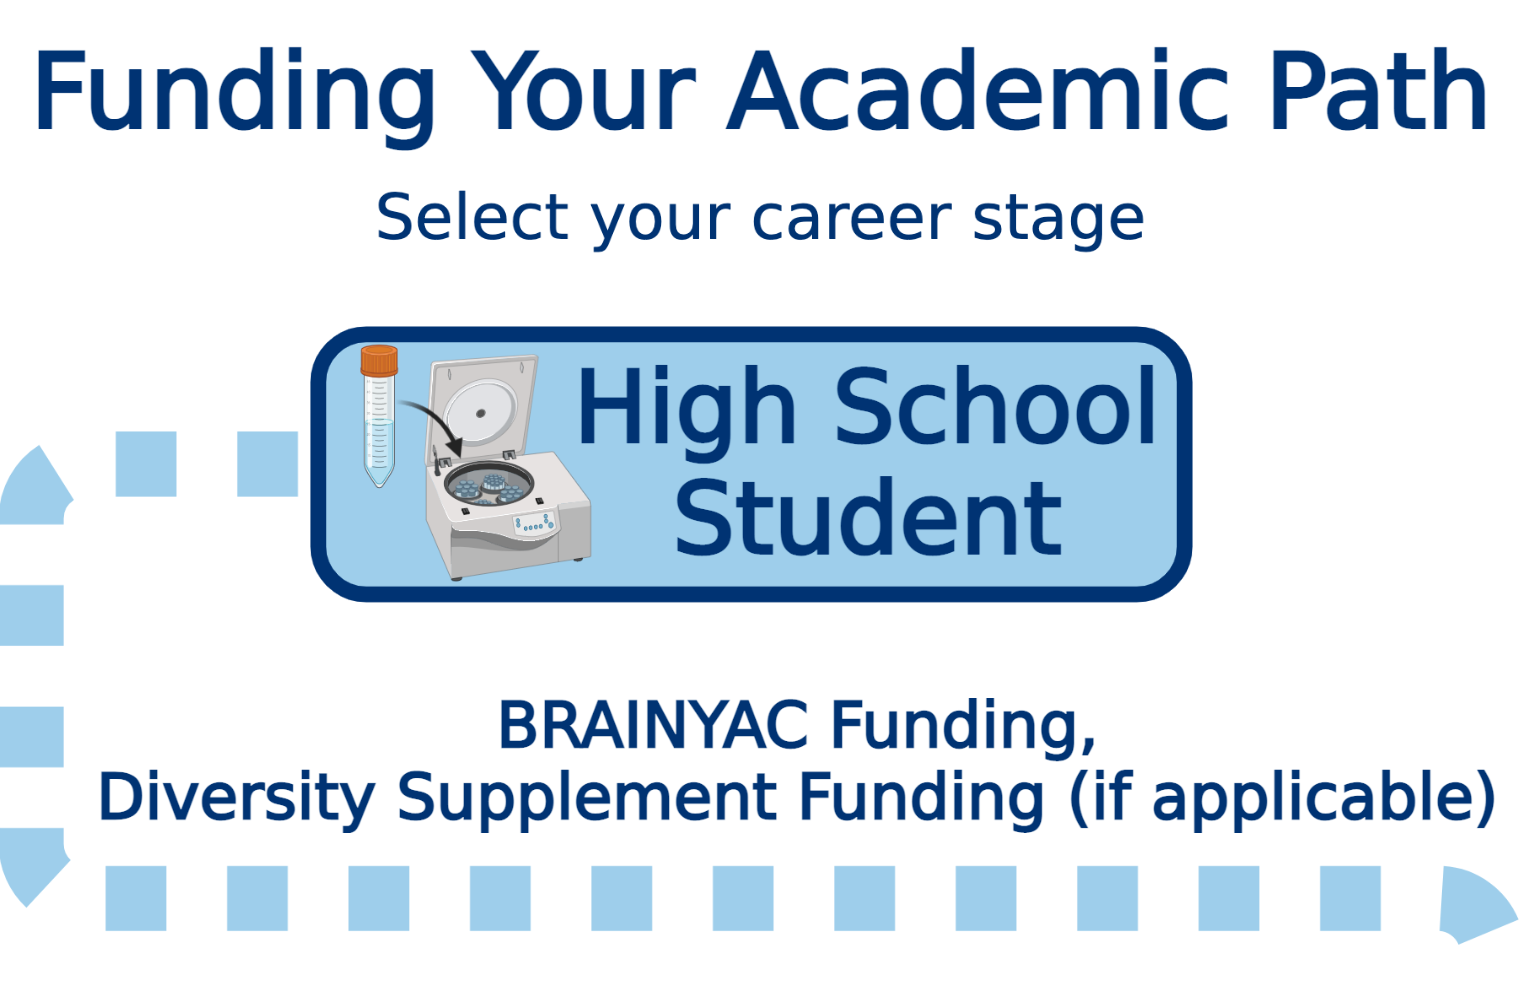 Funding Your Academic Path - High School stage. We help with BRAINYAC funding and diversity supplements (if applicable)